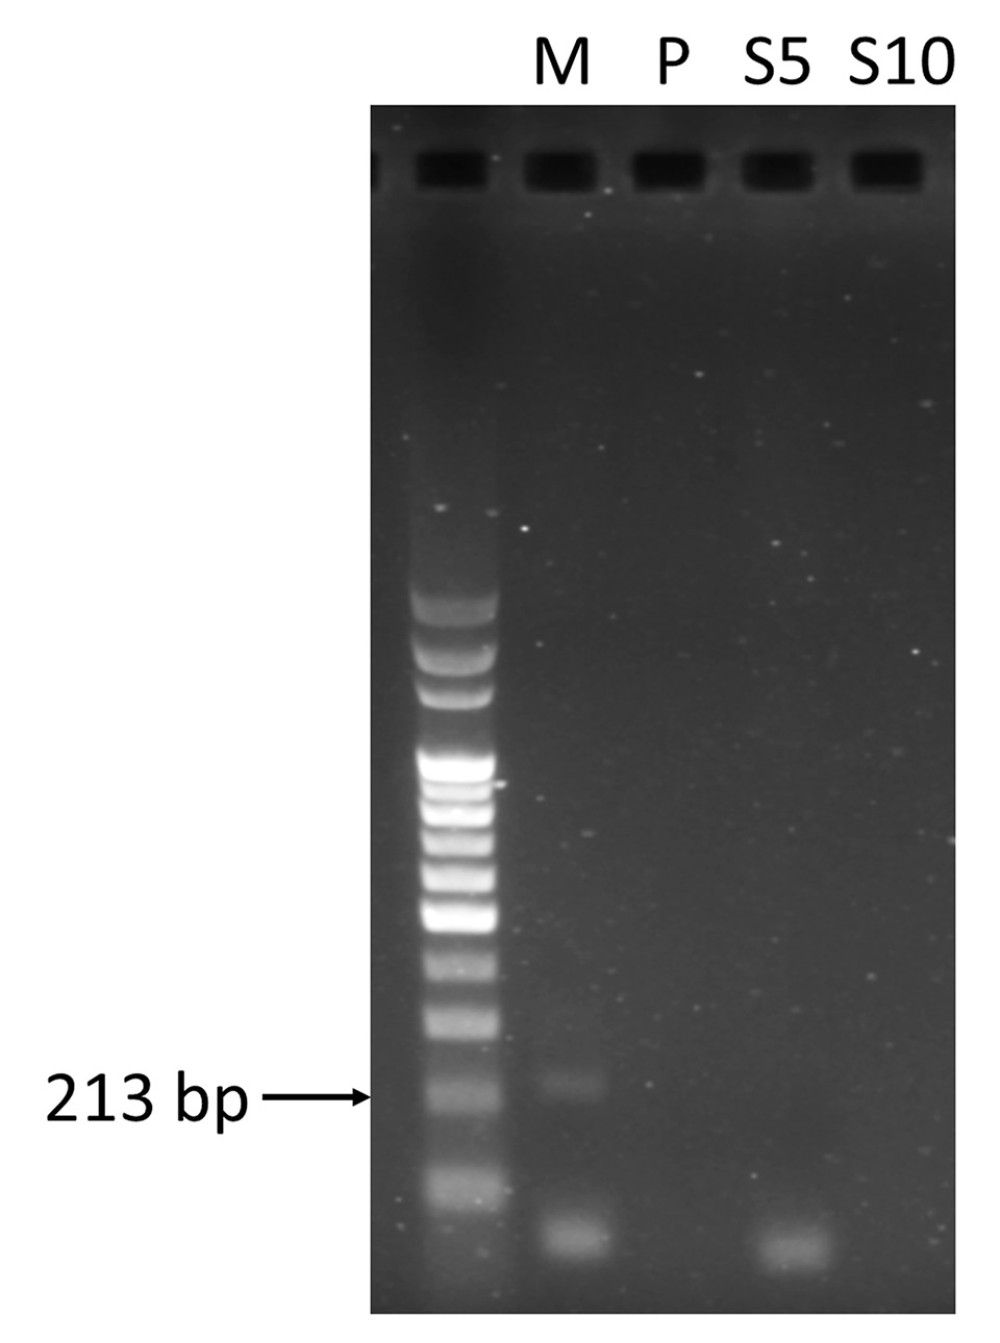 Agarose gel electrophoresis of PCR amplification for mitochondrial cytochrome oxidase subunit 1 (CO1) gene. P – CSF pellet mixed with 2 primers; S5 – 5 μL supernatant of CSF mixed with 2 primers; S10 – 10 μL CSF supernatant mixed with 2 primers. The first lane indicates a 100-bp ladder DNA size marker and the arrow indicates the size (213 bp) of the expected PCR products.